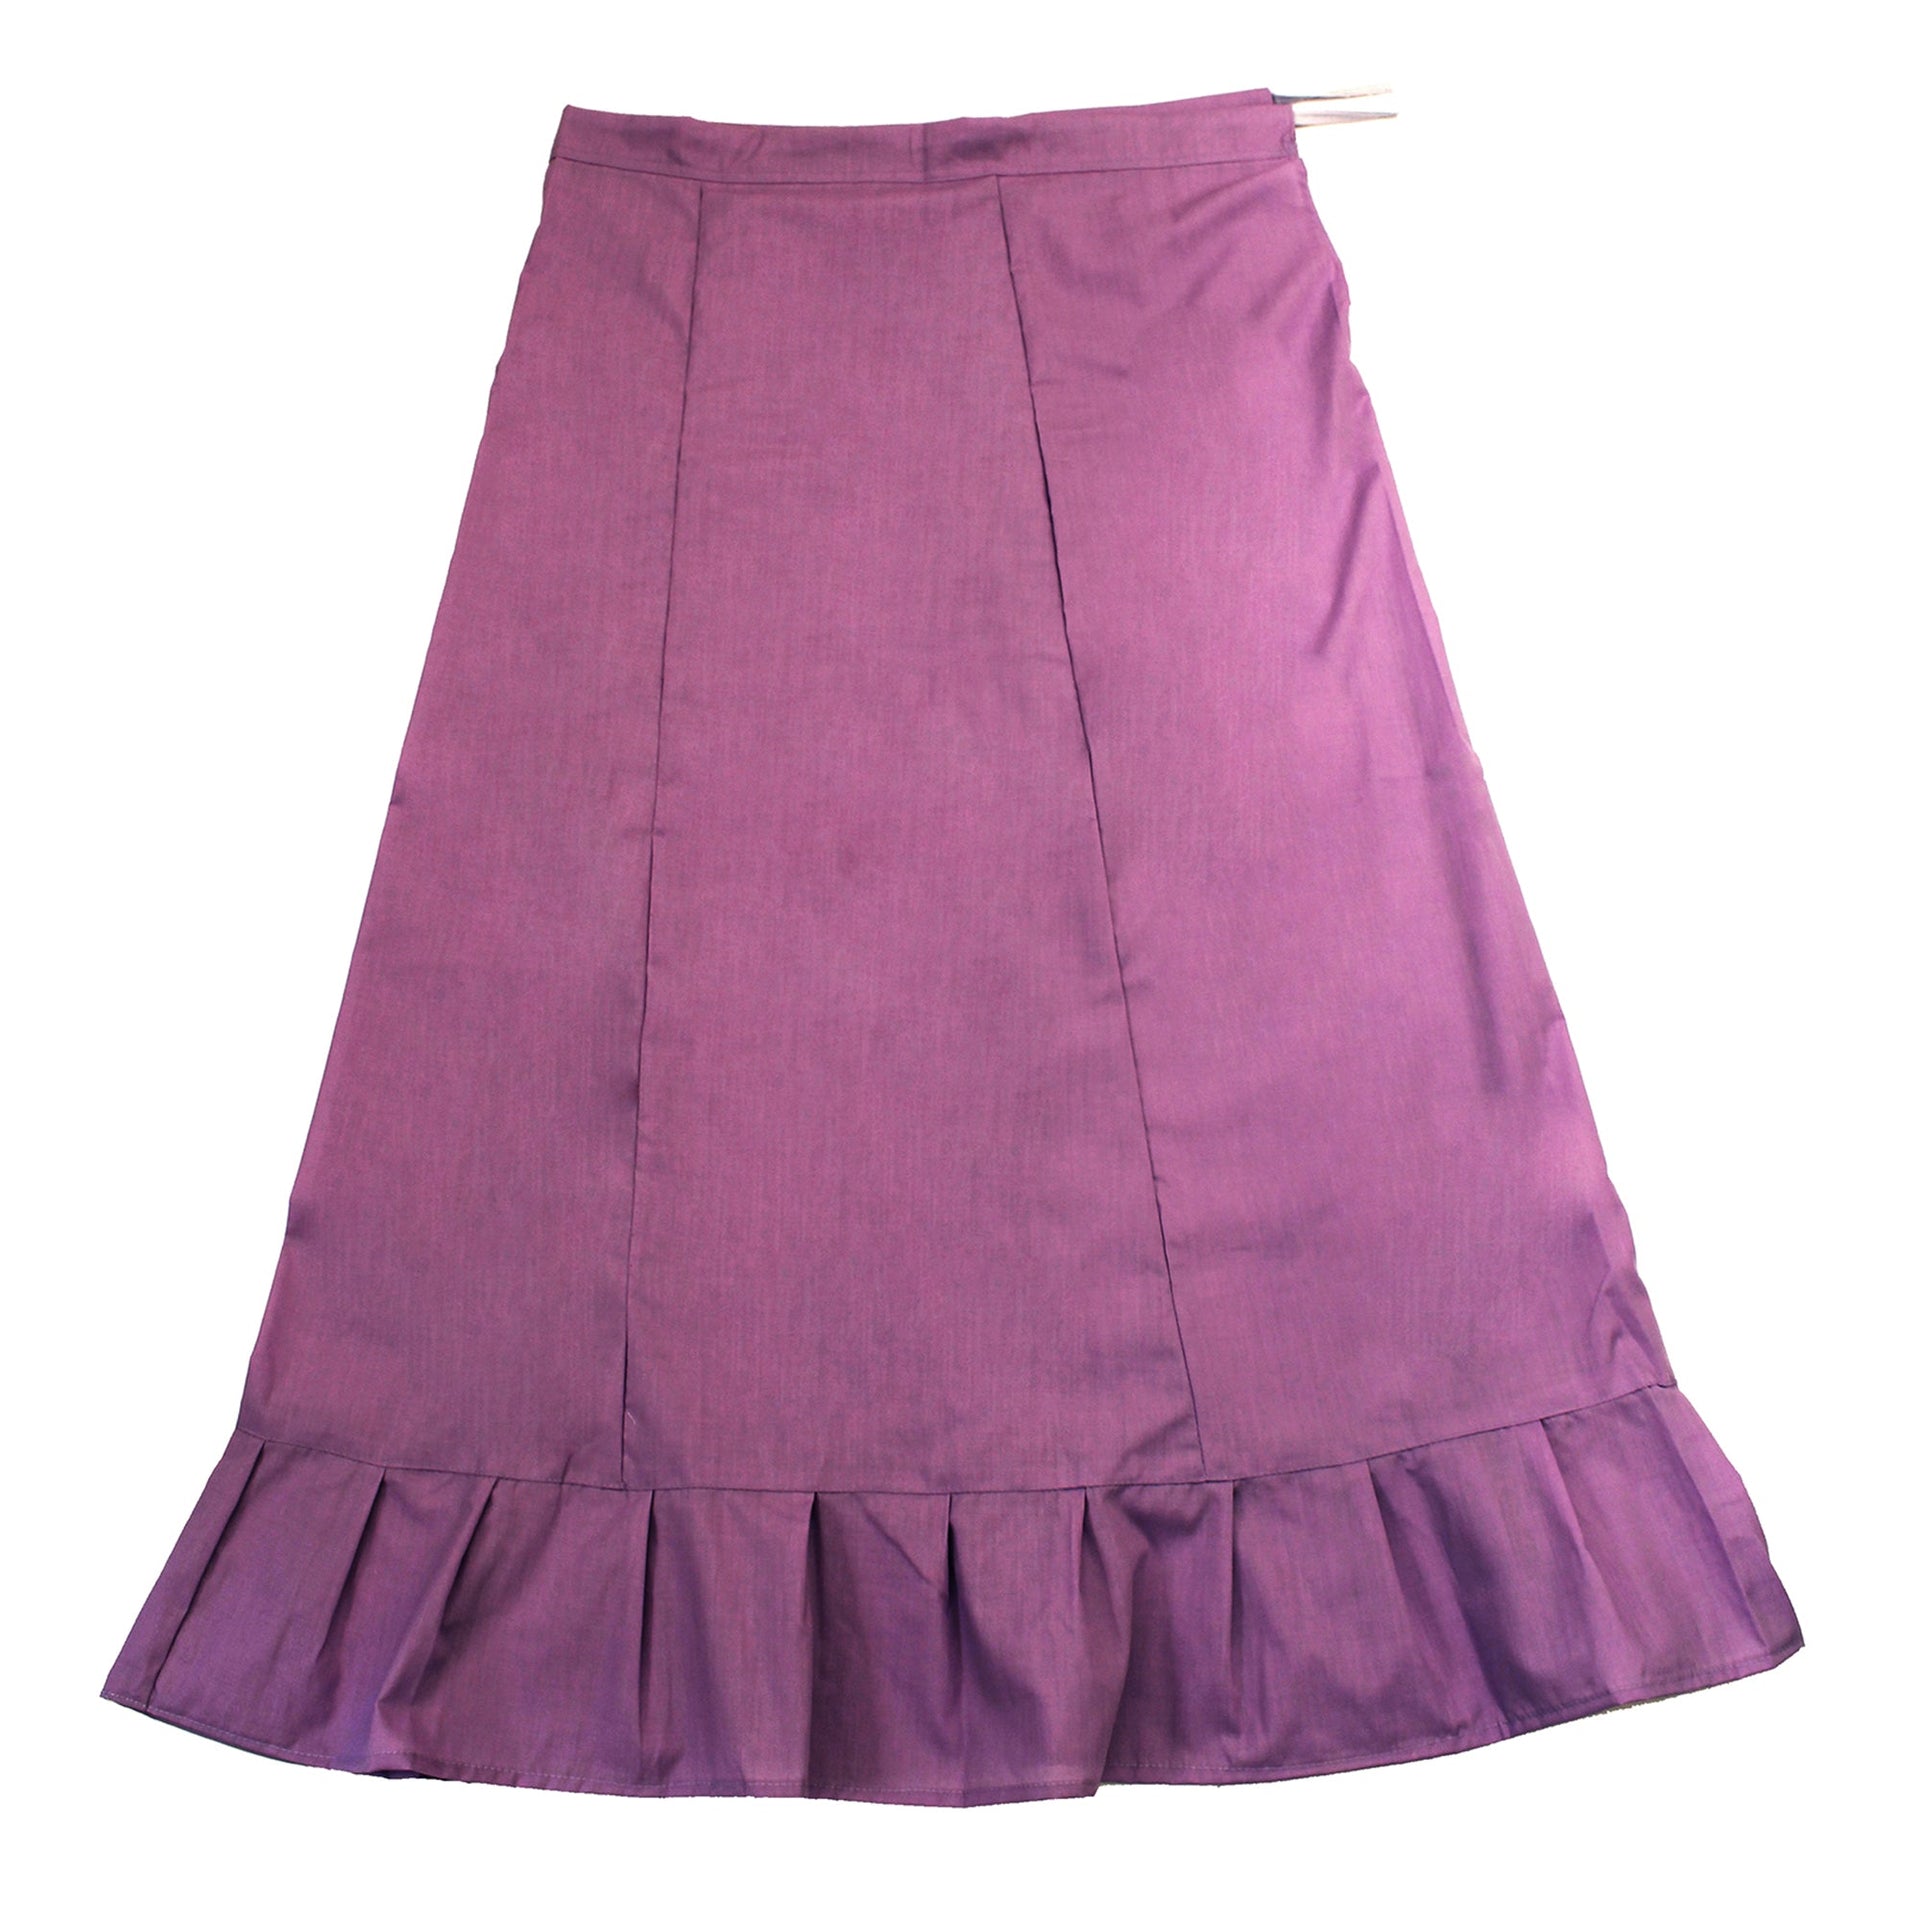 Petticoat Price Starting From Rs 89/Unit. Find Verified Sellers in